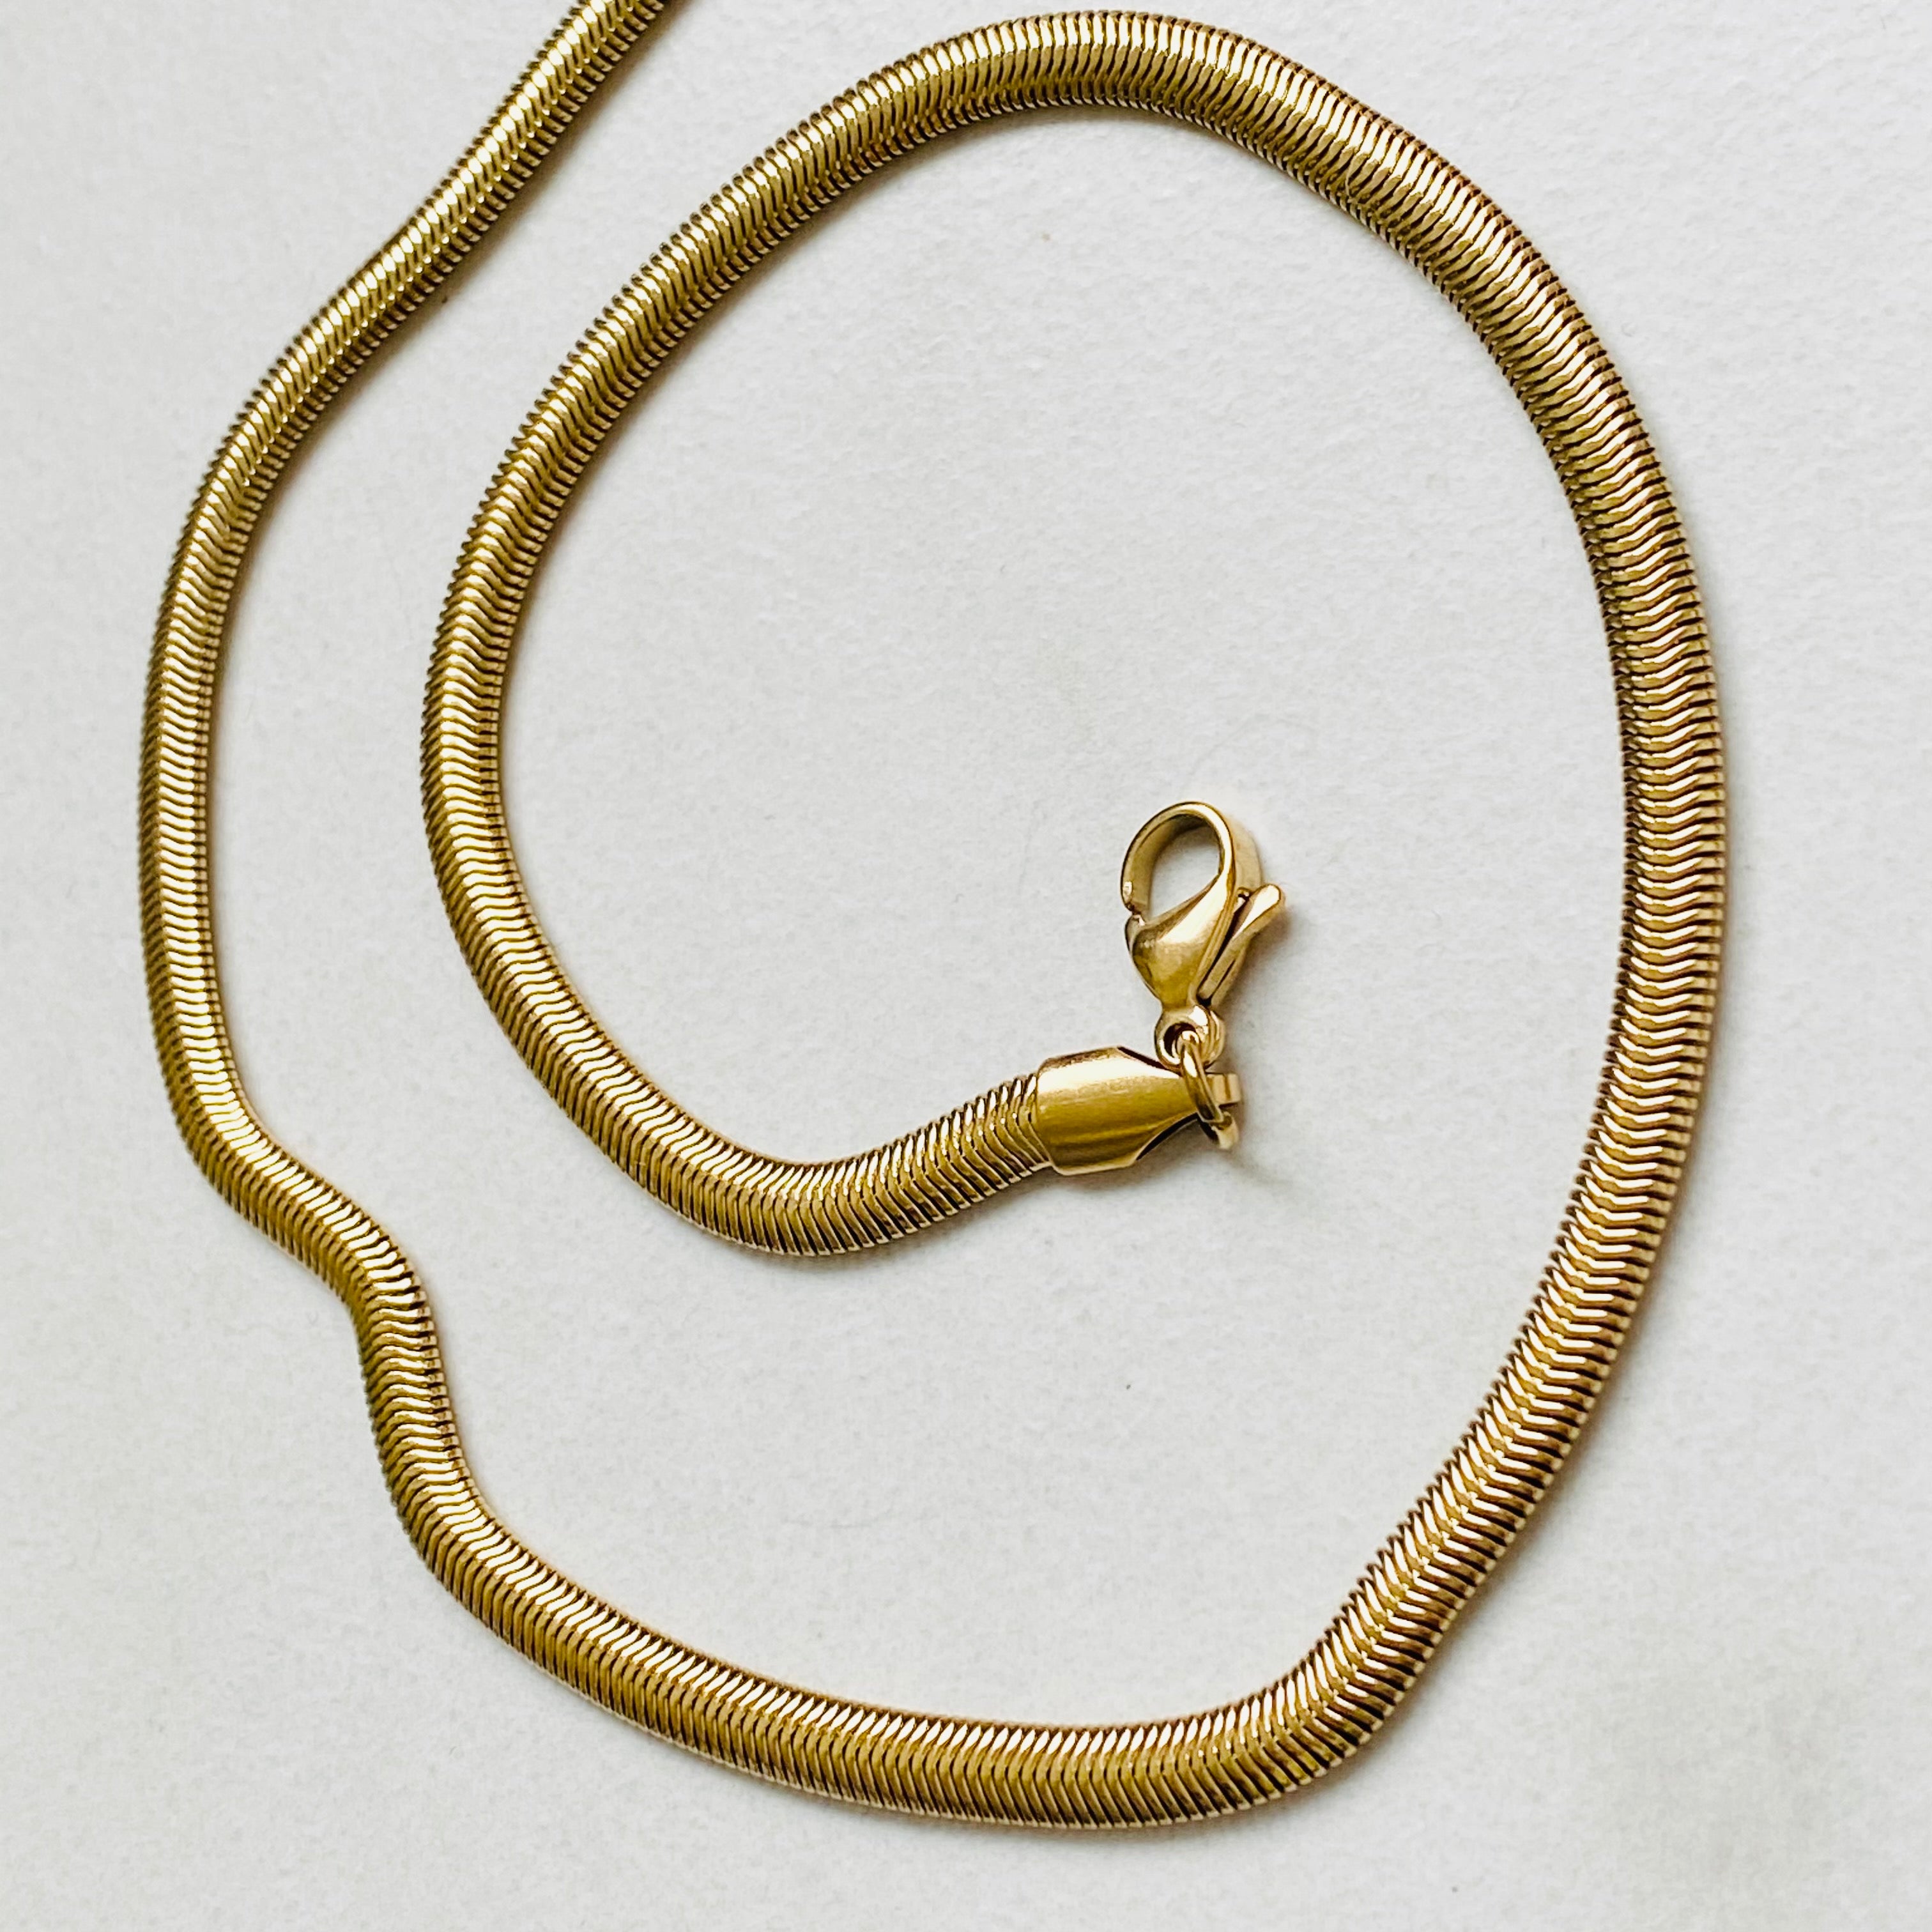 4mm Gold Plated Snake Chain 14” + 3”